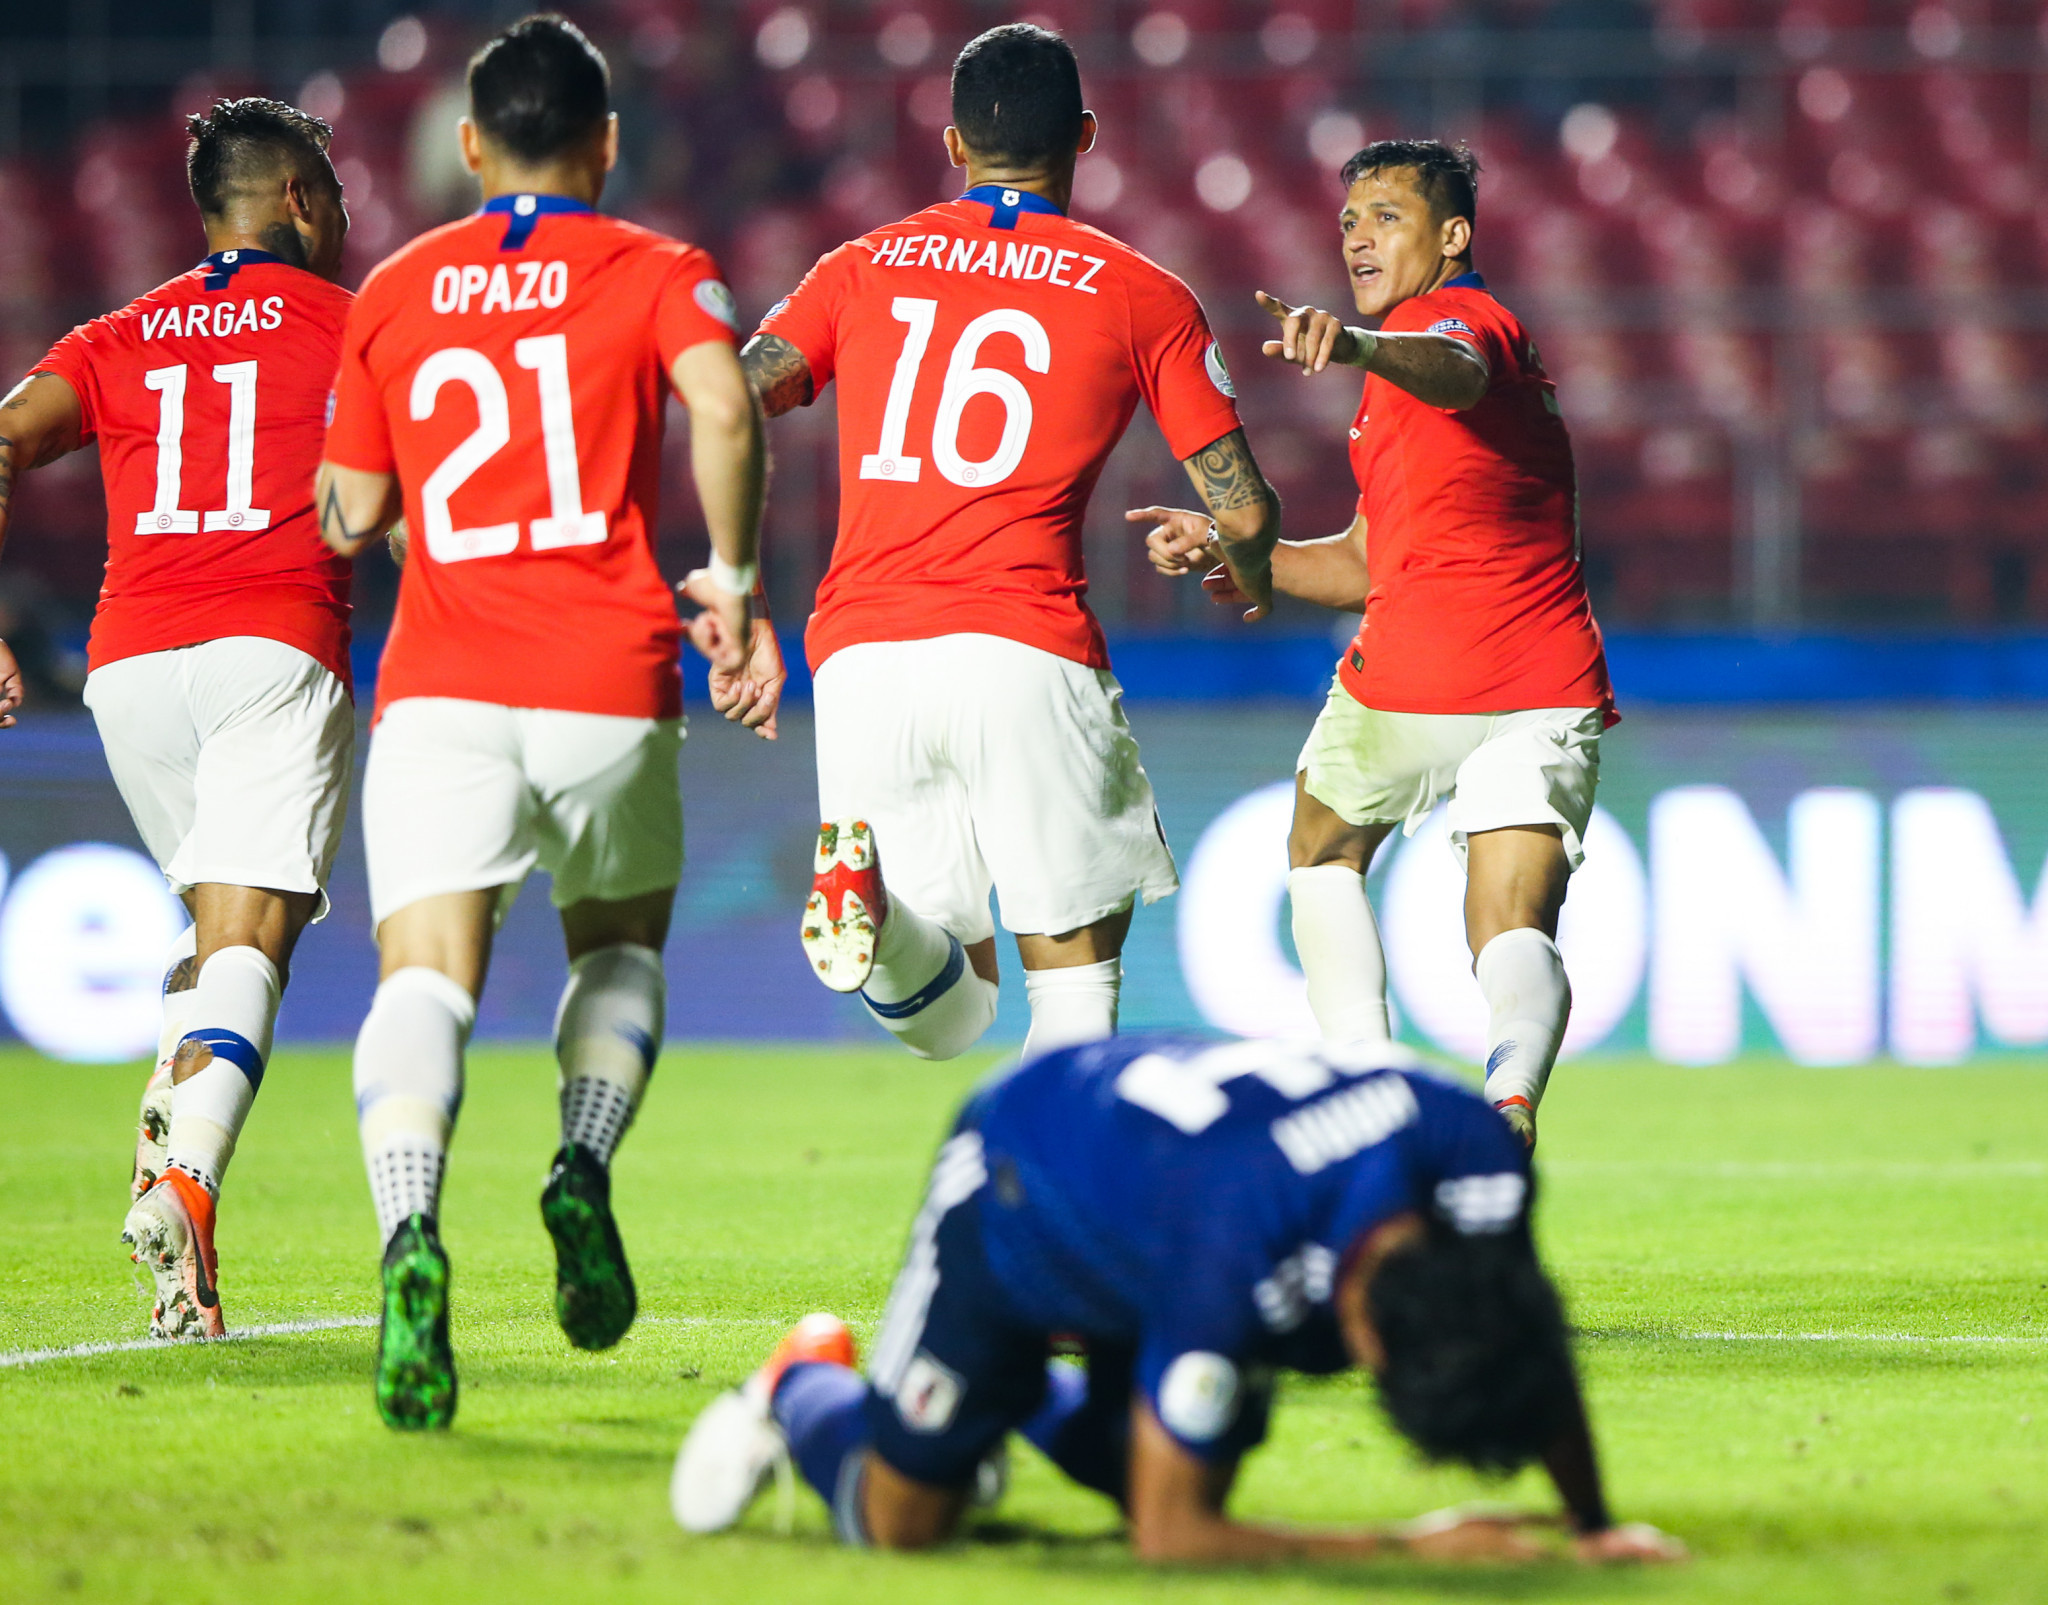 Reigning champions Chile begin Copa América defence with thumping win against inexperienced Japan